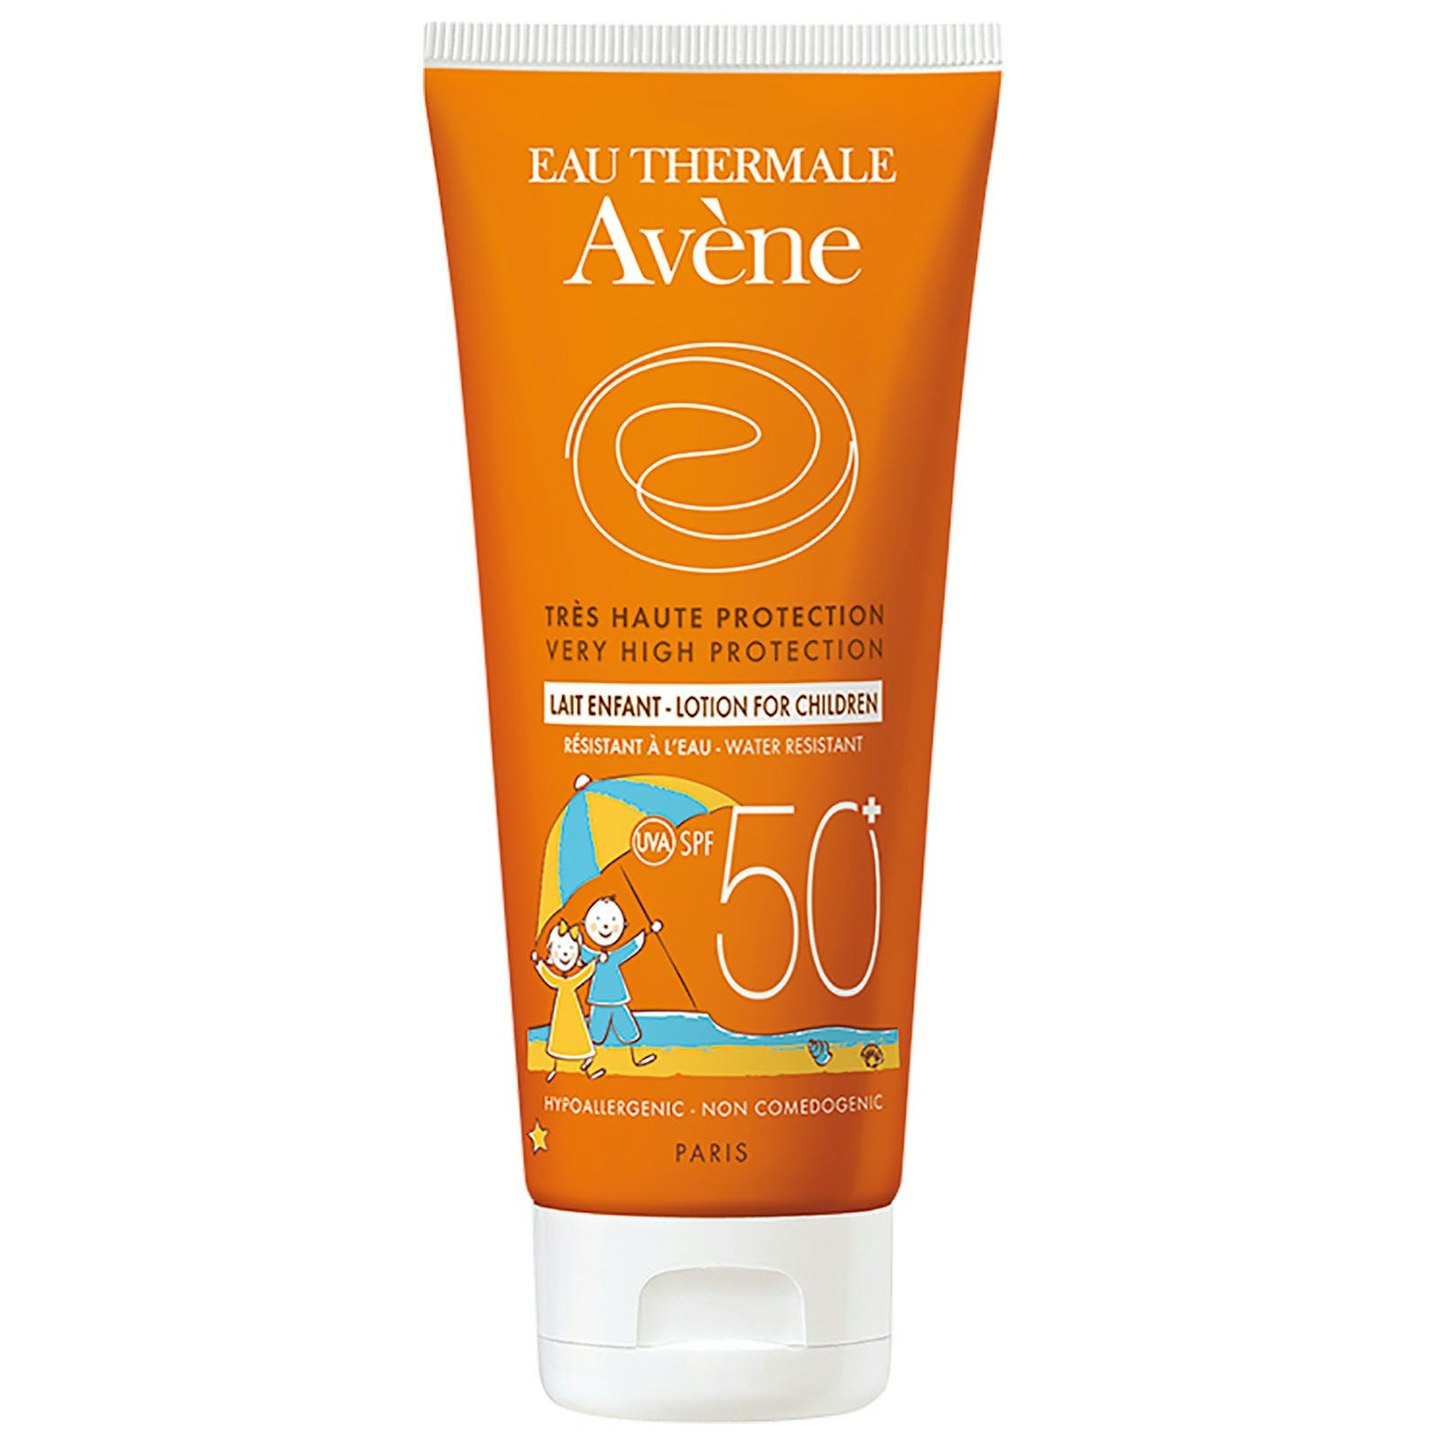  Eau Thermale Avène Very High Protection Lotion For Children SPF50+